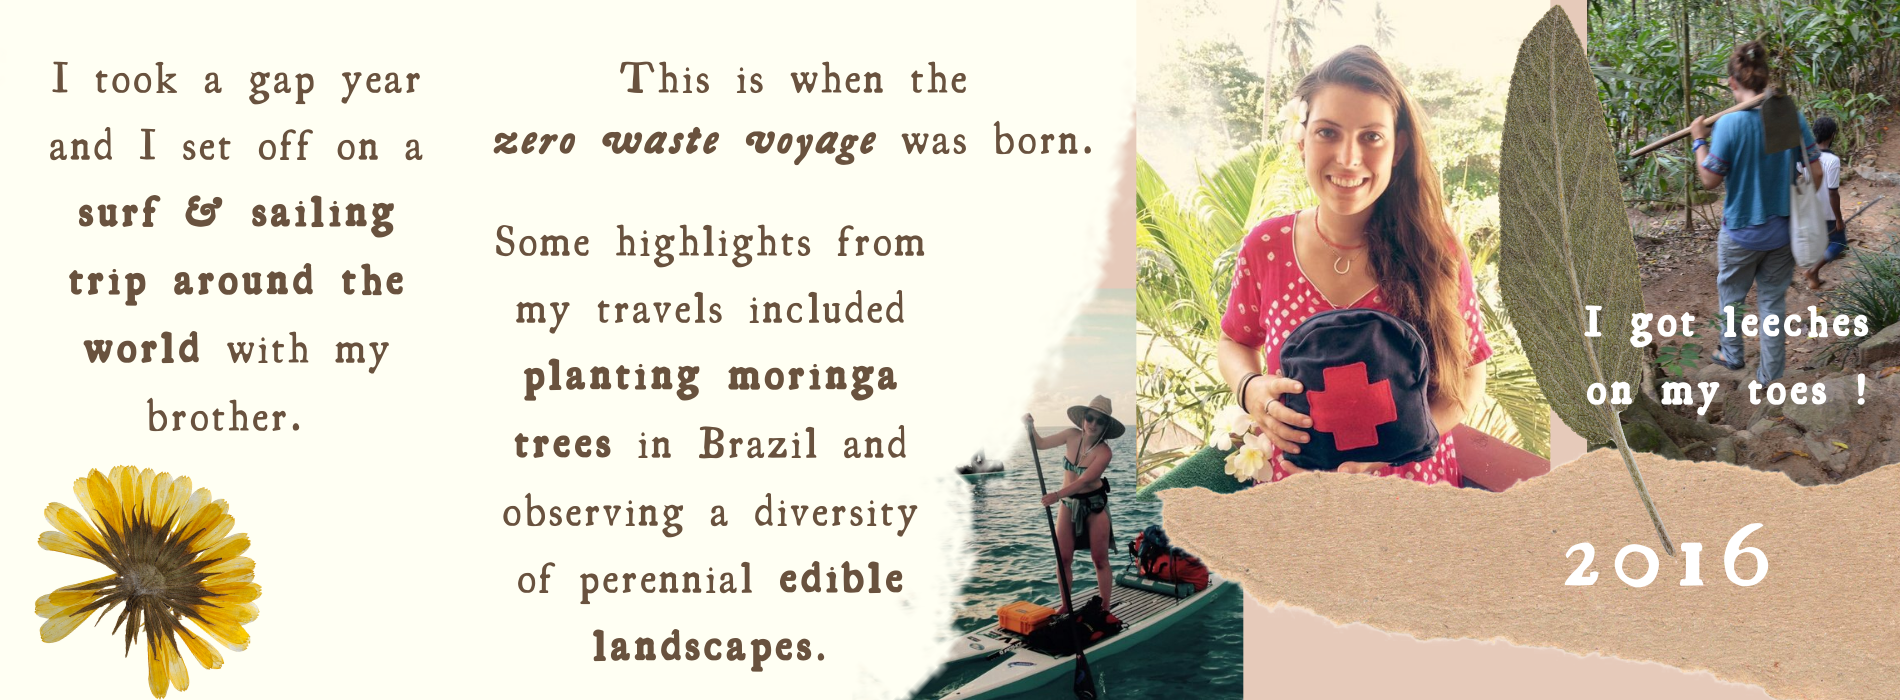 I took a gap year and I set off on a surf & sailing trip around the world with my brother. This is when the zero waste voyage was born. Some highlights from my travels included planting moringa trees in Brazil and observing a diversity of perennial edible landscapes.